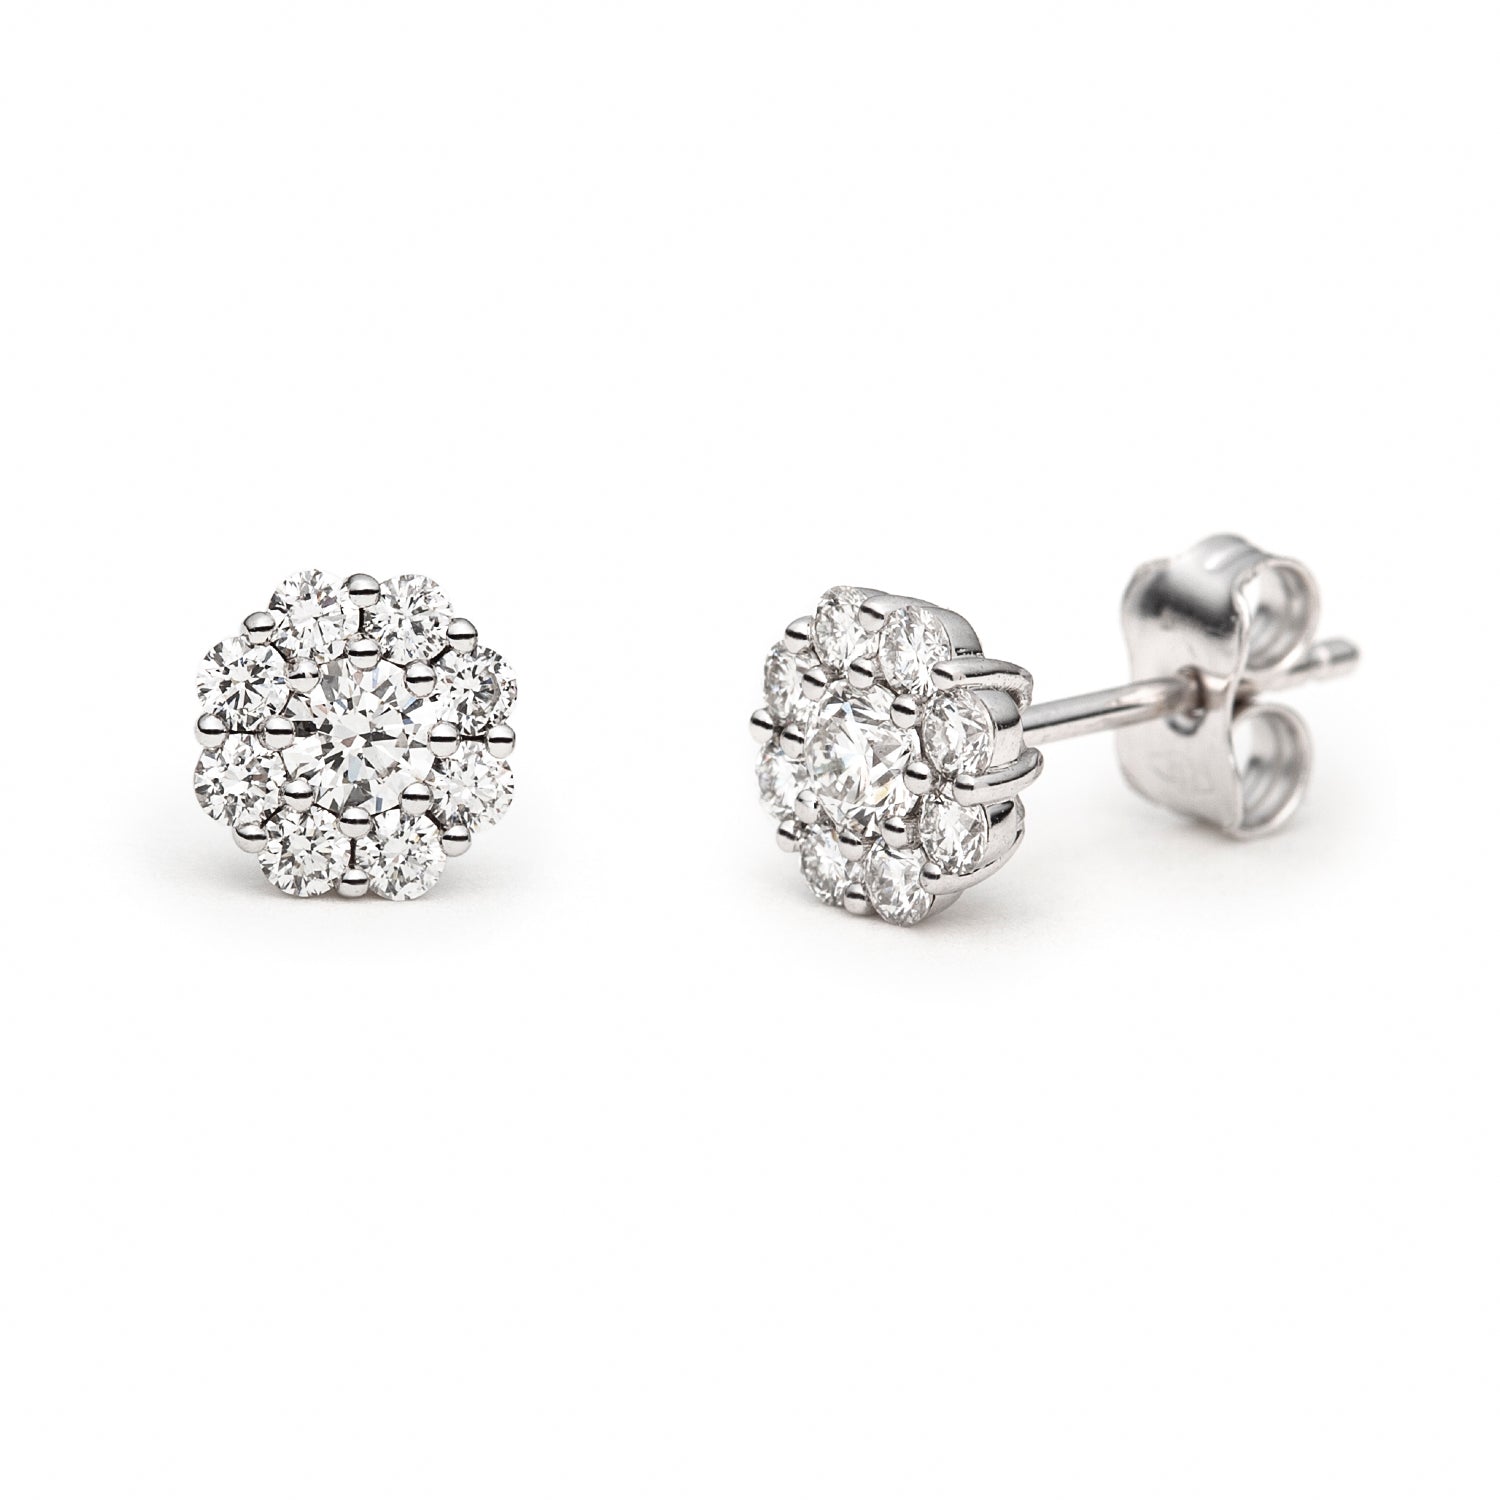 Round Brilliant Cut Diamond Floral Cluster Stud Earrings in White Gold